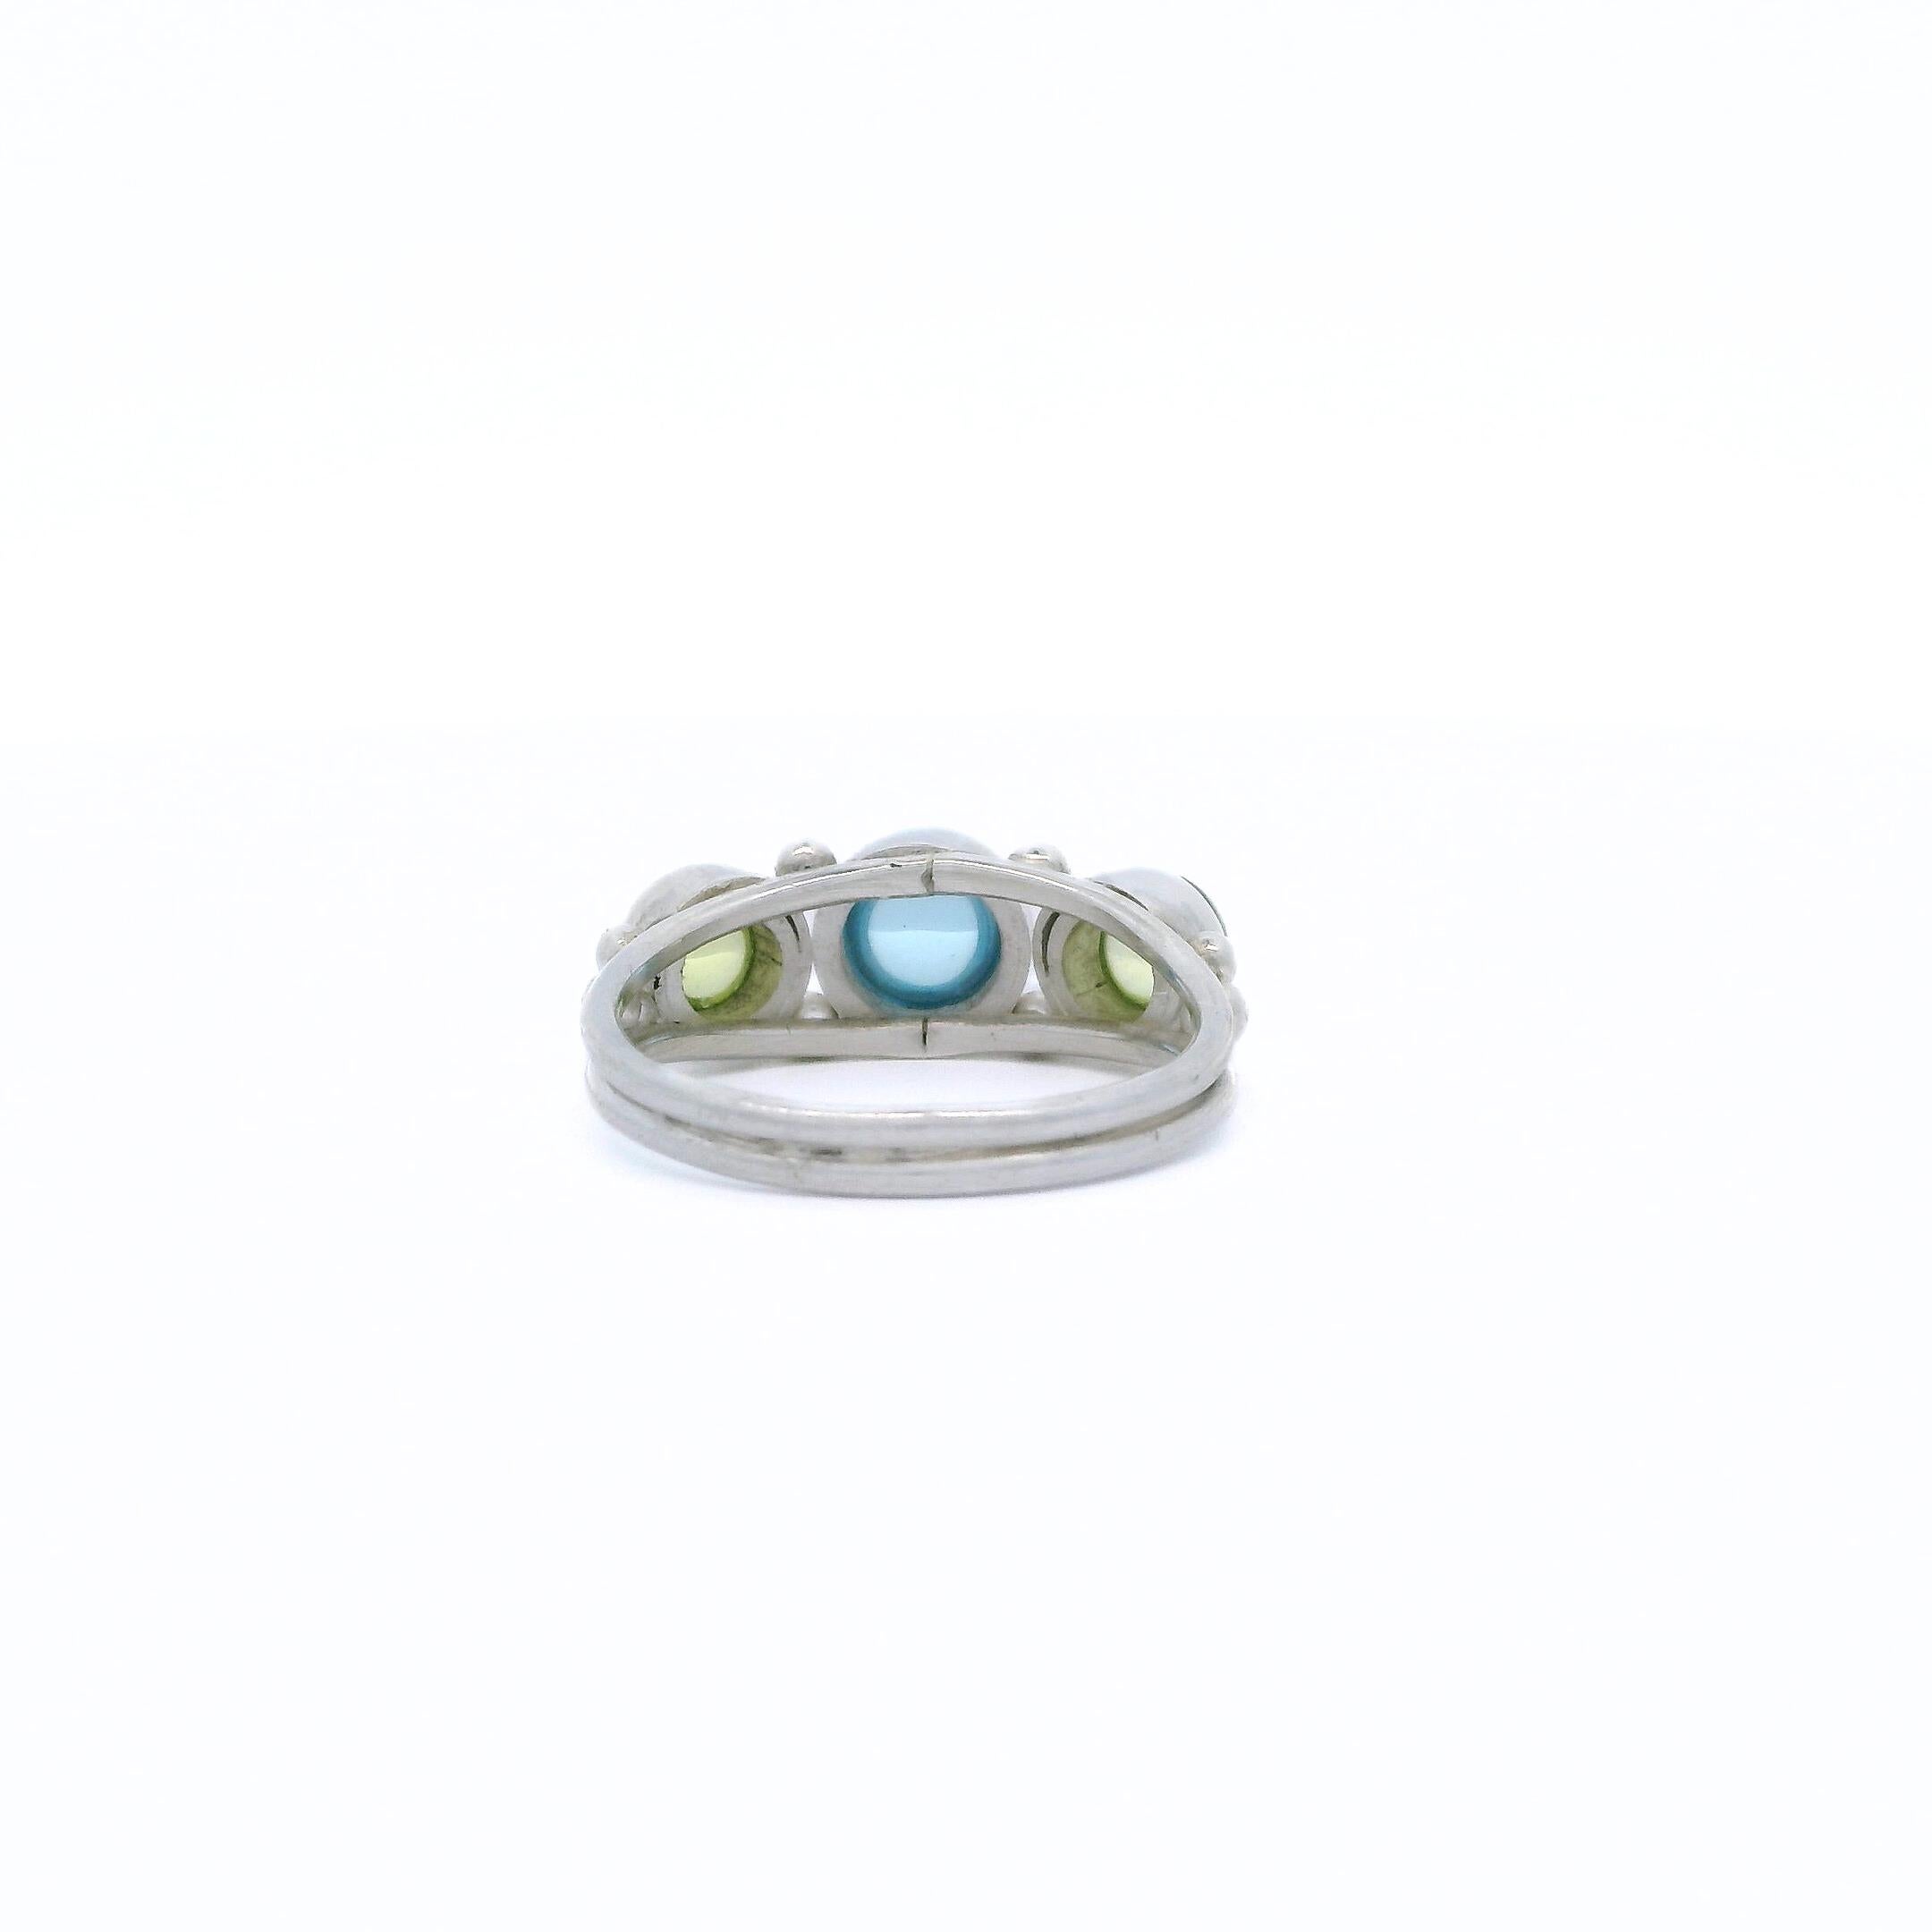 Cabochon Blue Topaz Peridot Silver 3-stone Cocktail Ring, Lynn Kathyrn Miller For Sale 1